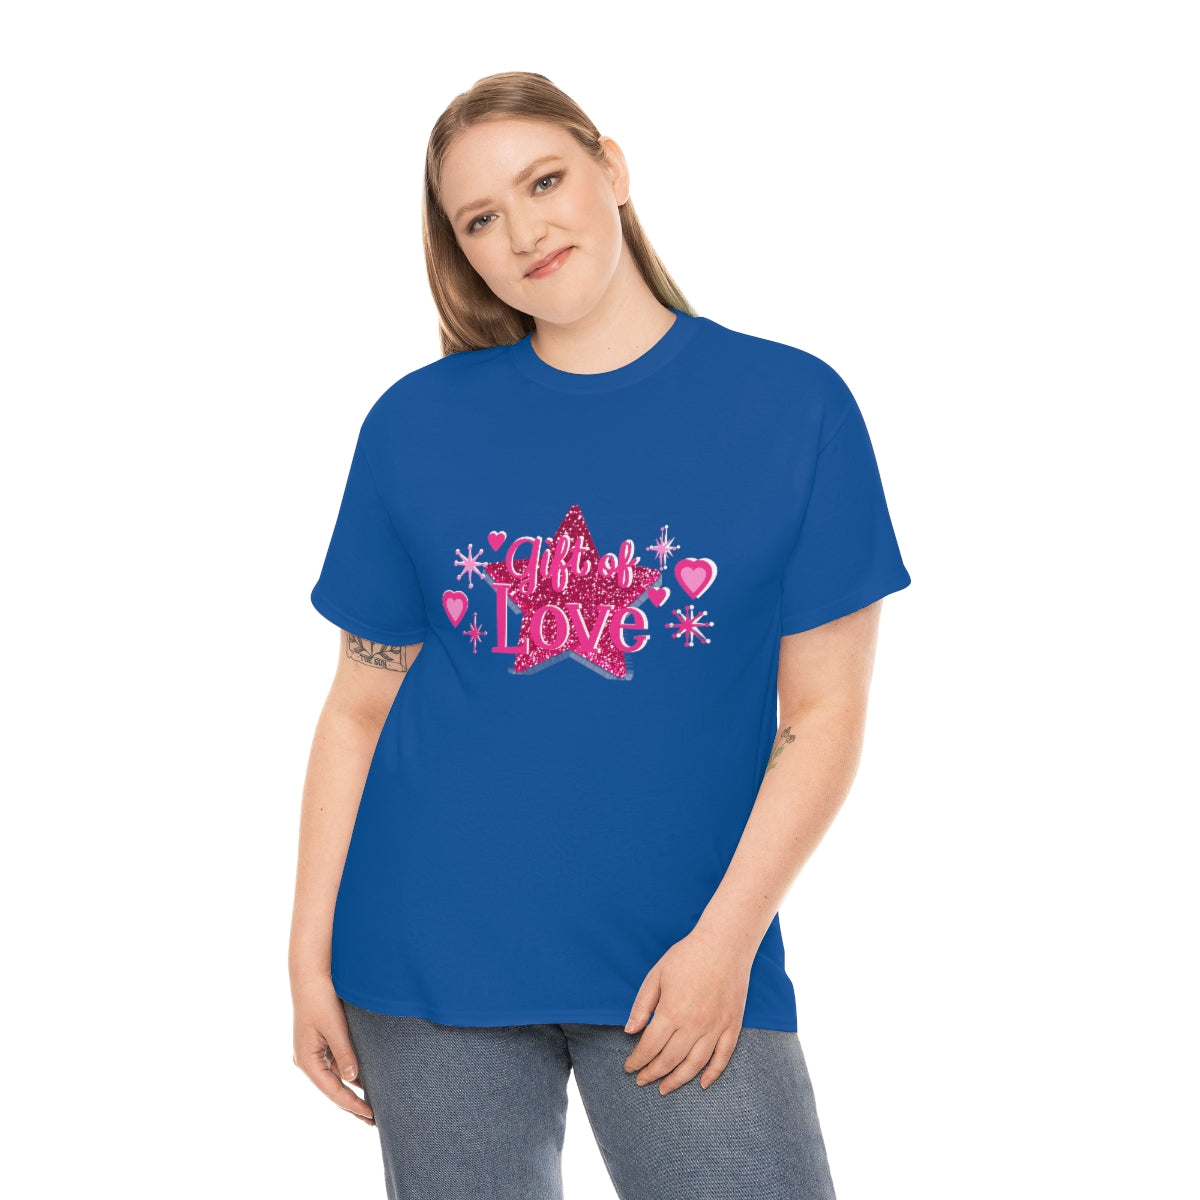 Pink Sparking Star Gift Of Love message Tee shirt